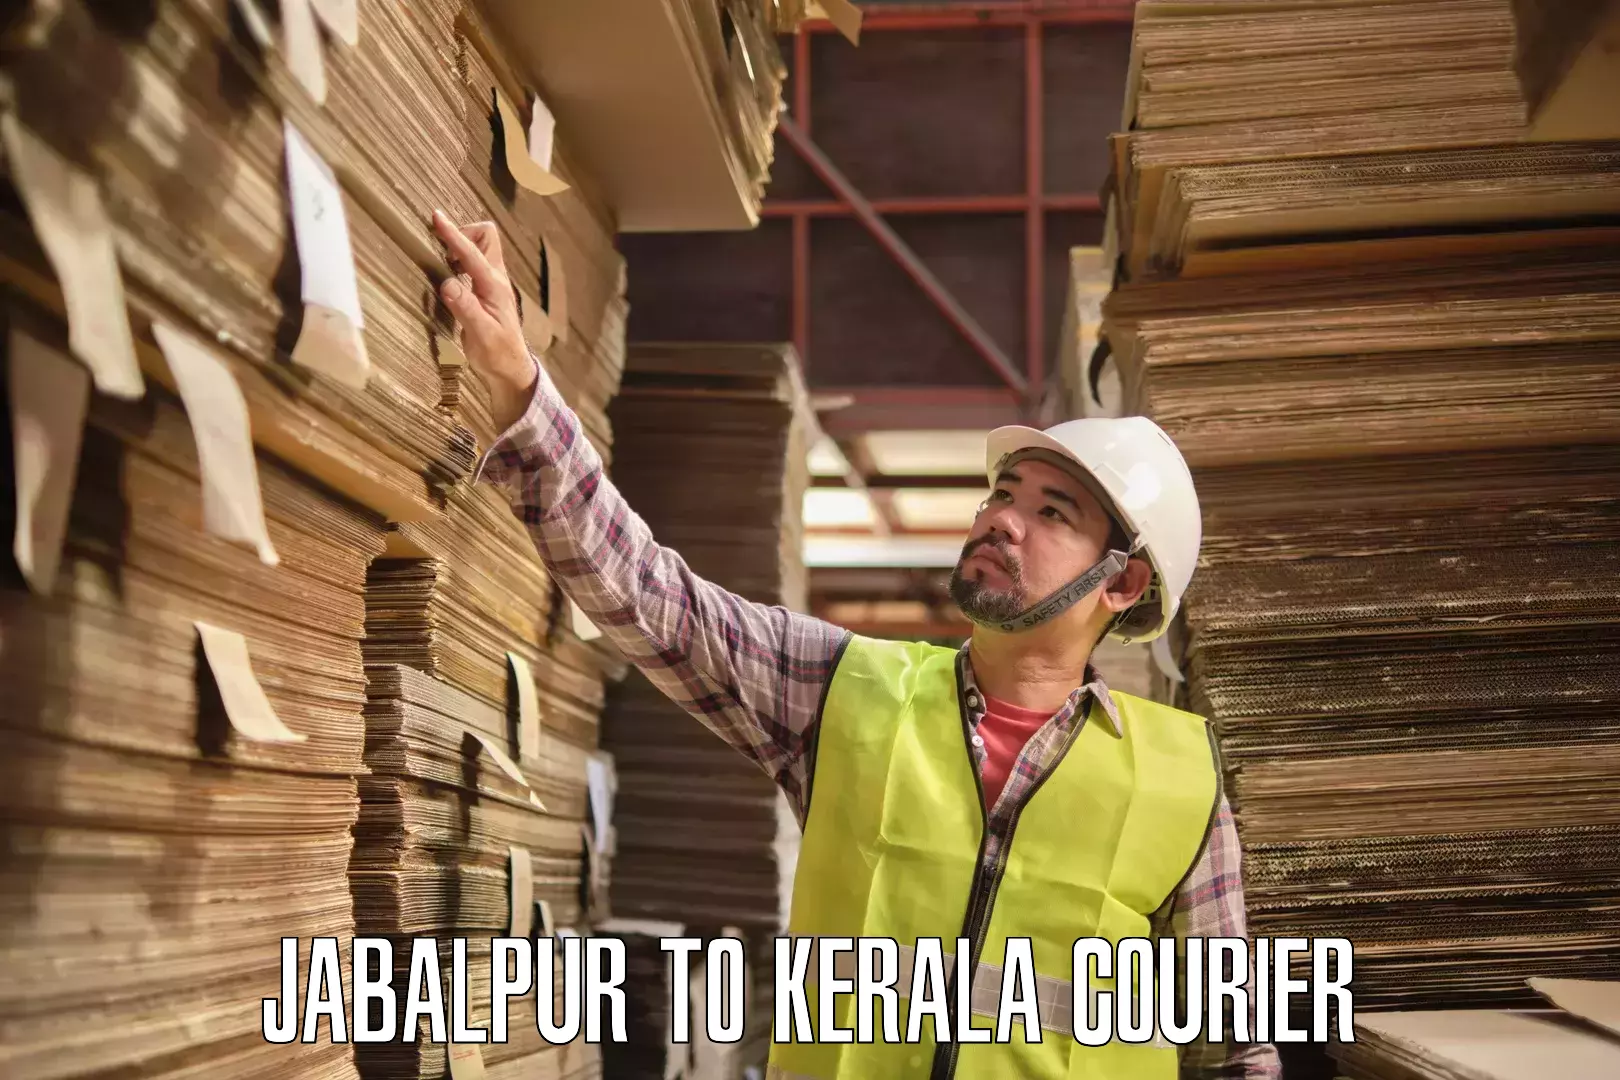 Next-generation courier services Jabalpur to Cochin University of Science and Technology